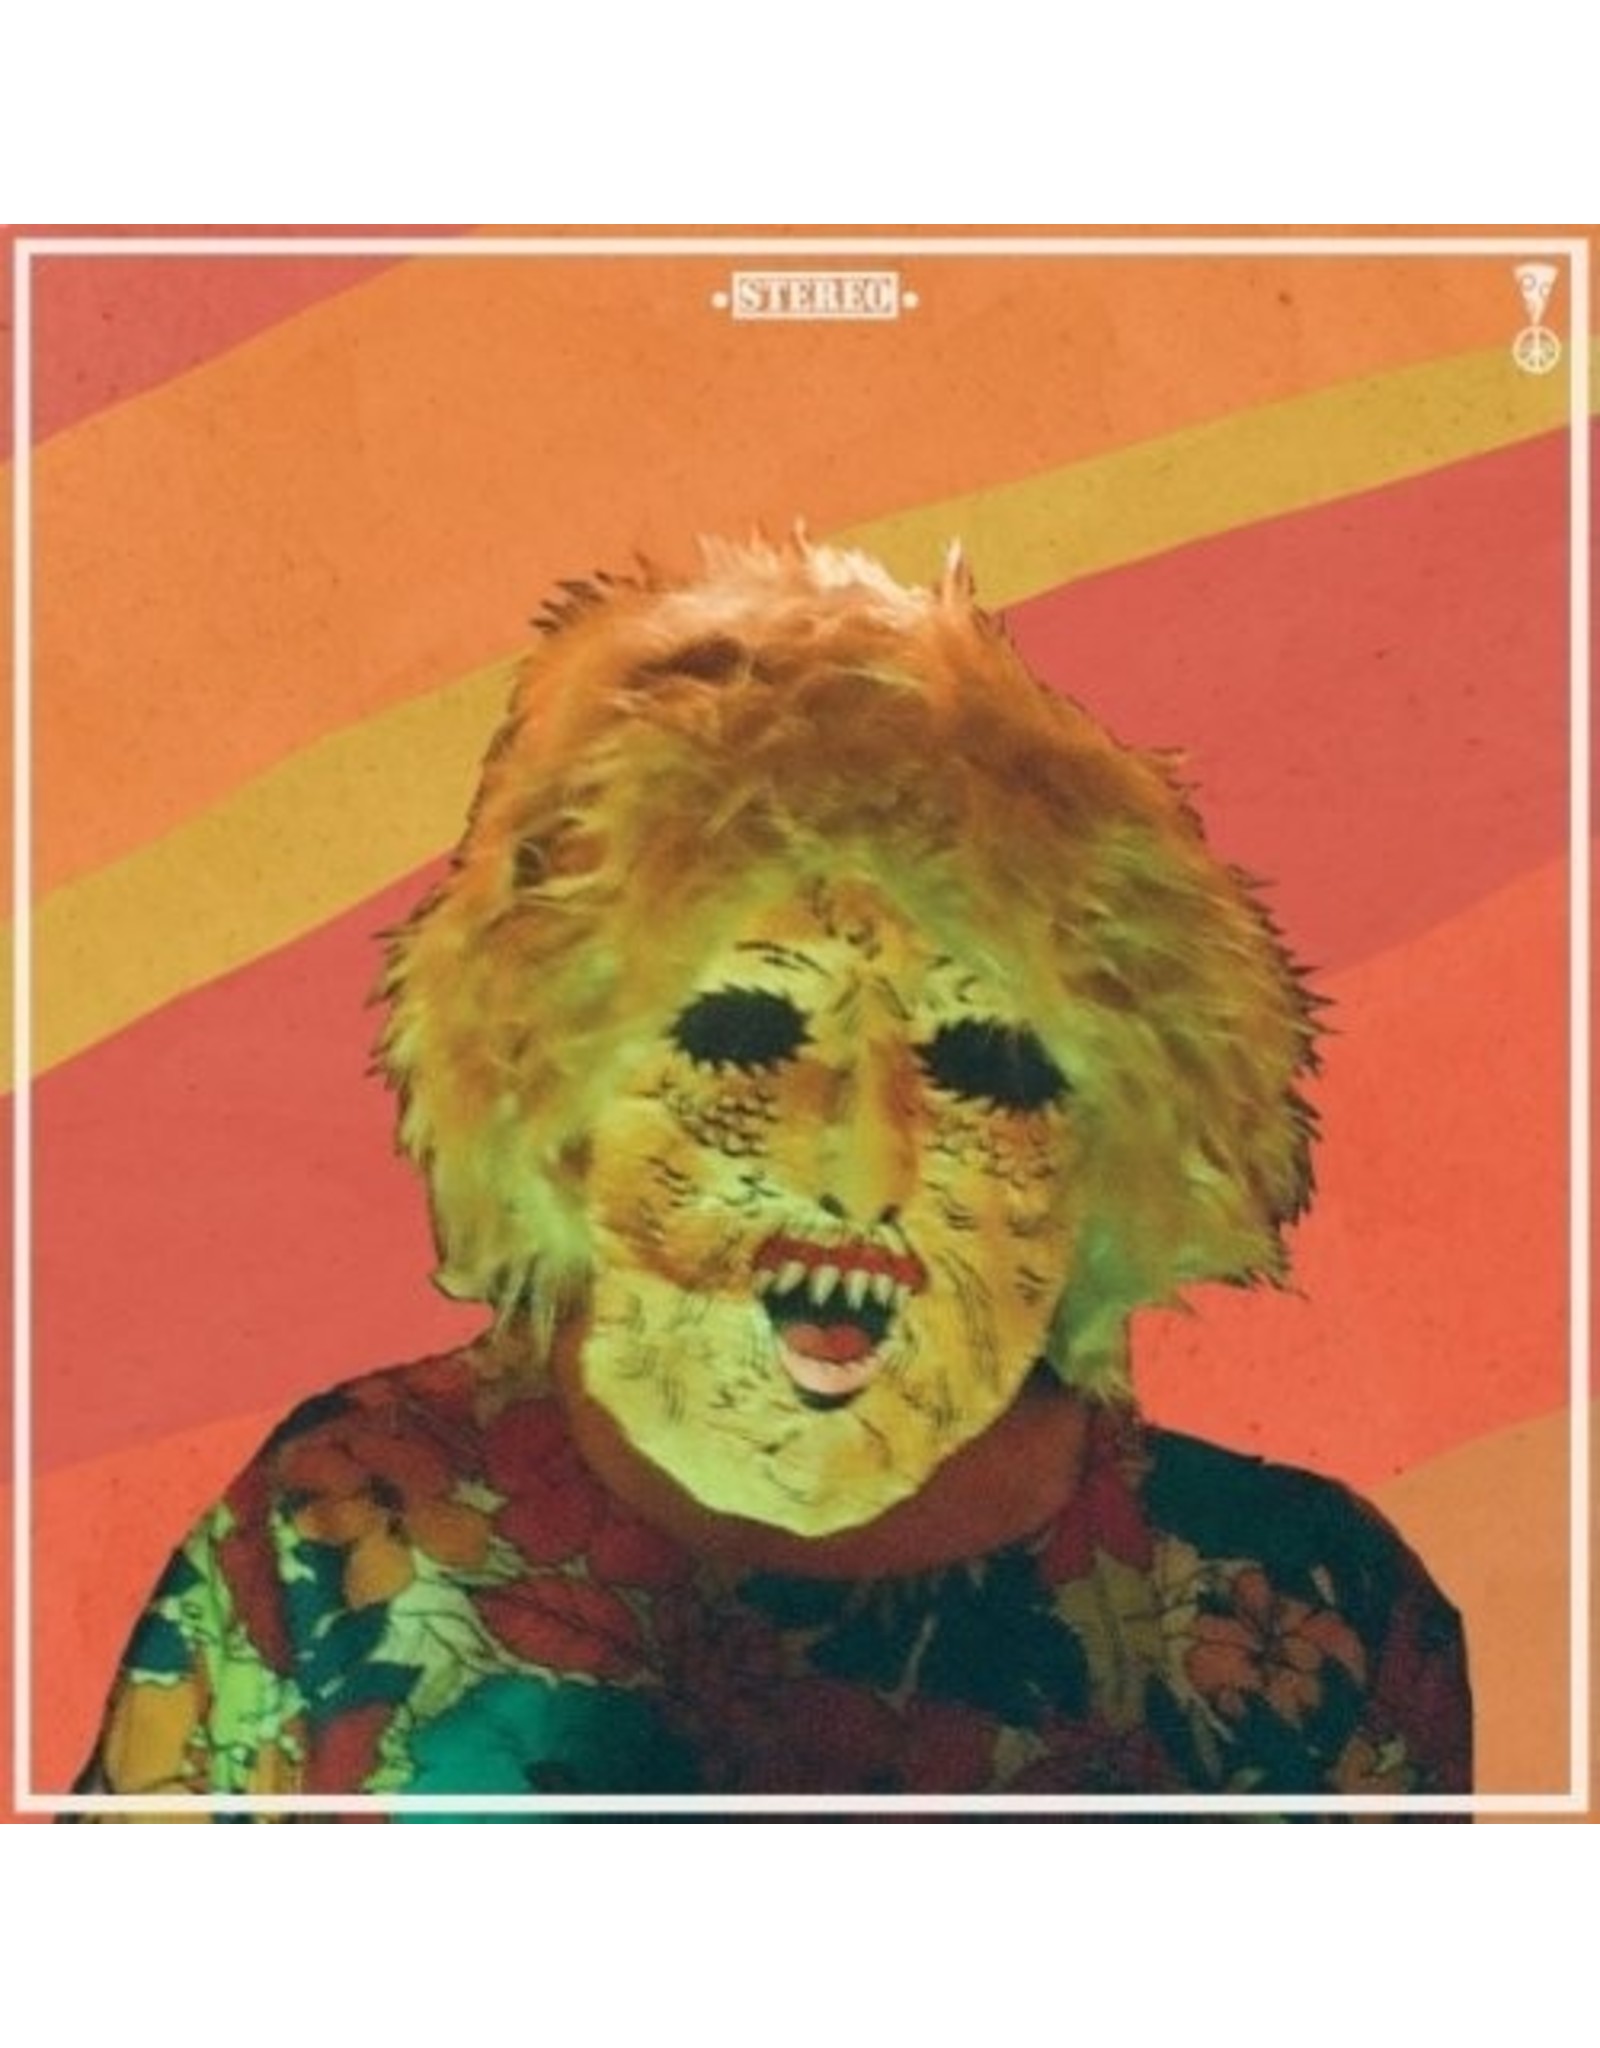 New Vinyl Ty Segall - Melted LP